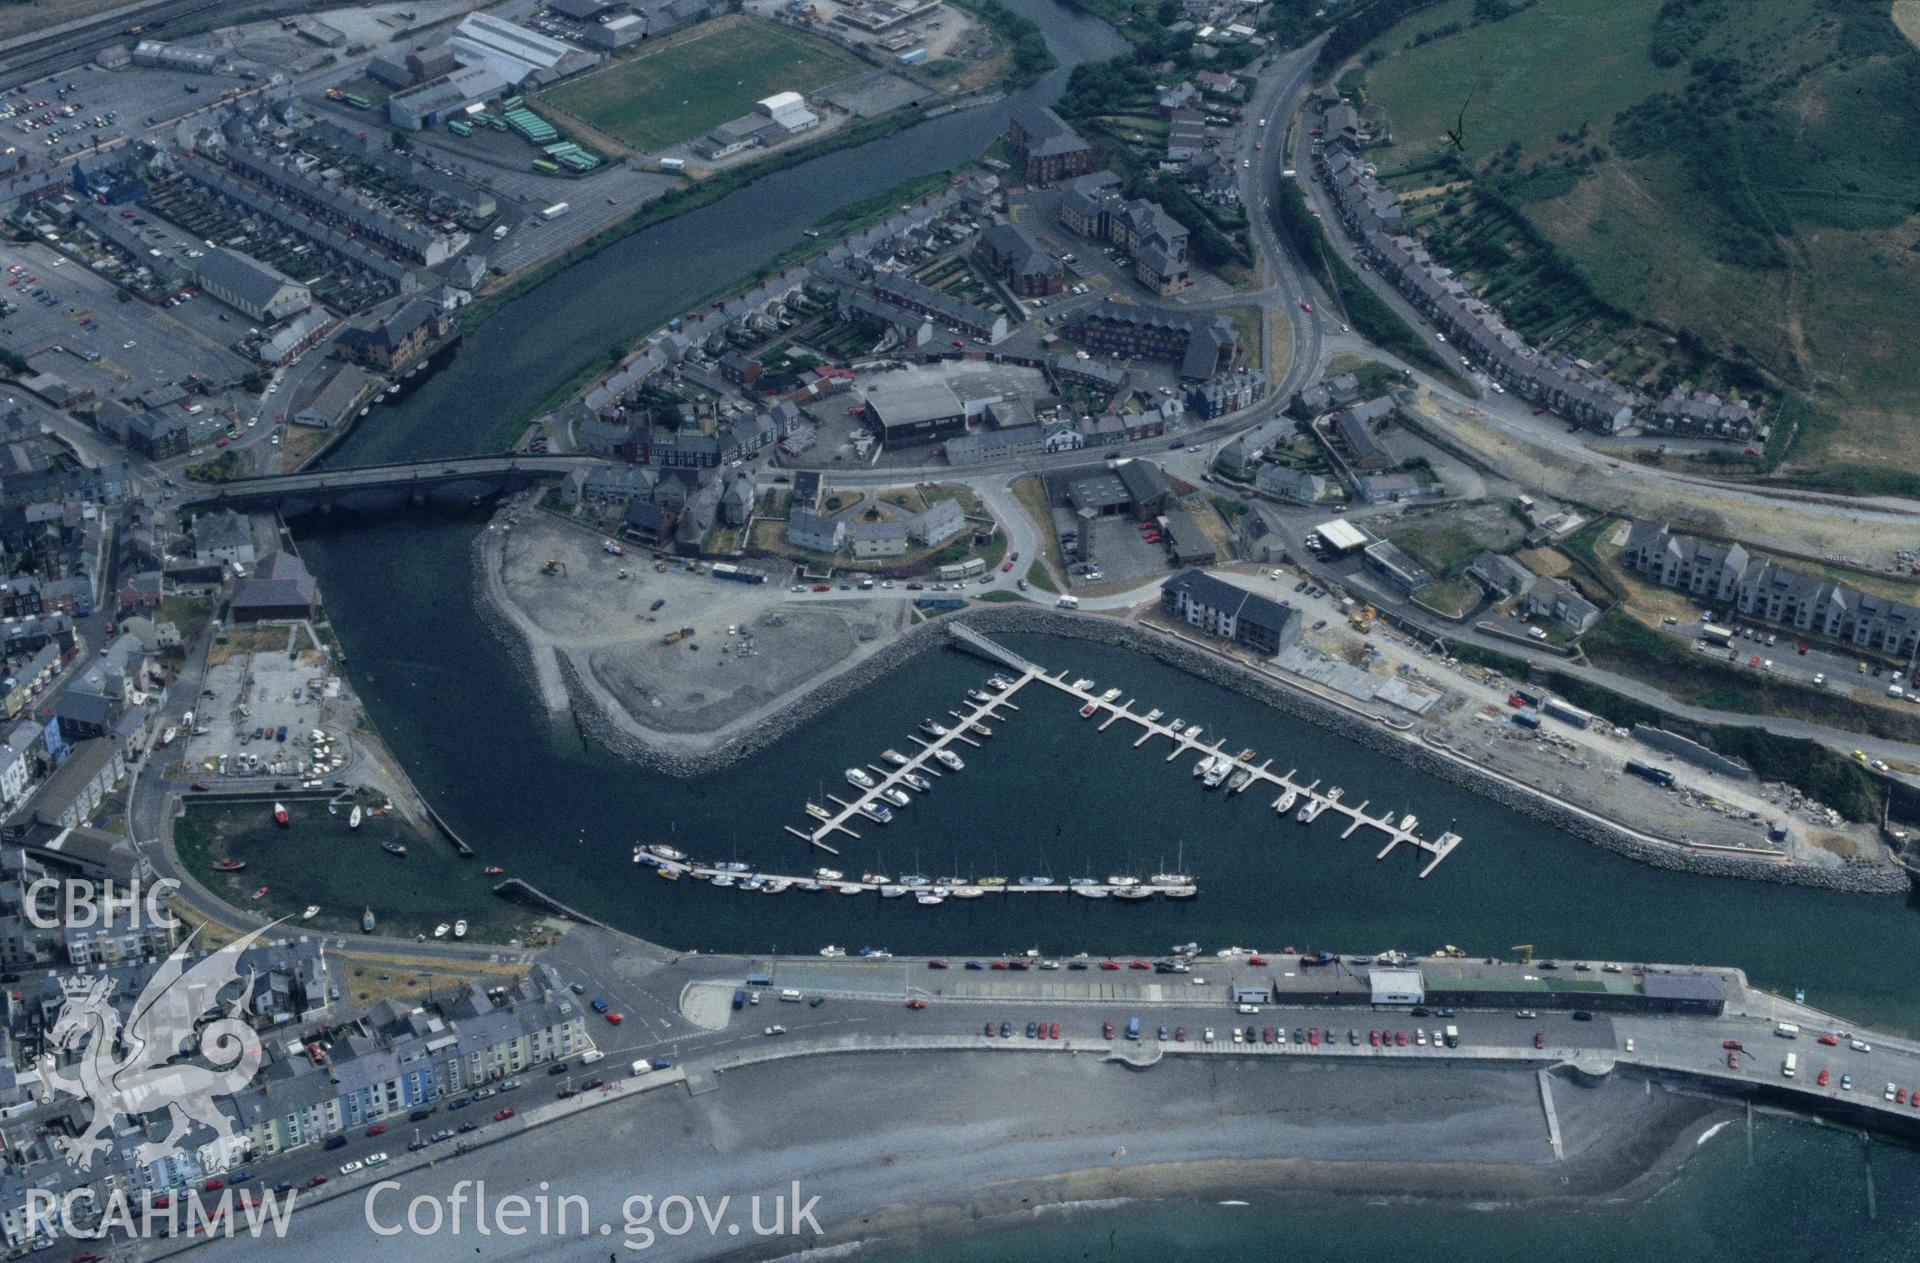 RCAHMW colour oblique aerial photograph of Aberystwyth Harbour taken on 02/07/1995 by C.R. Musson